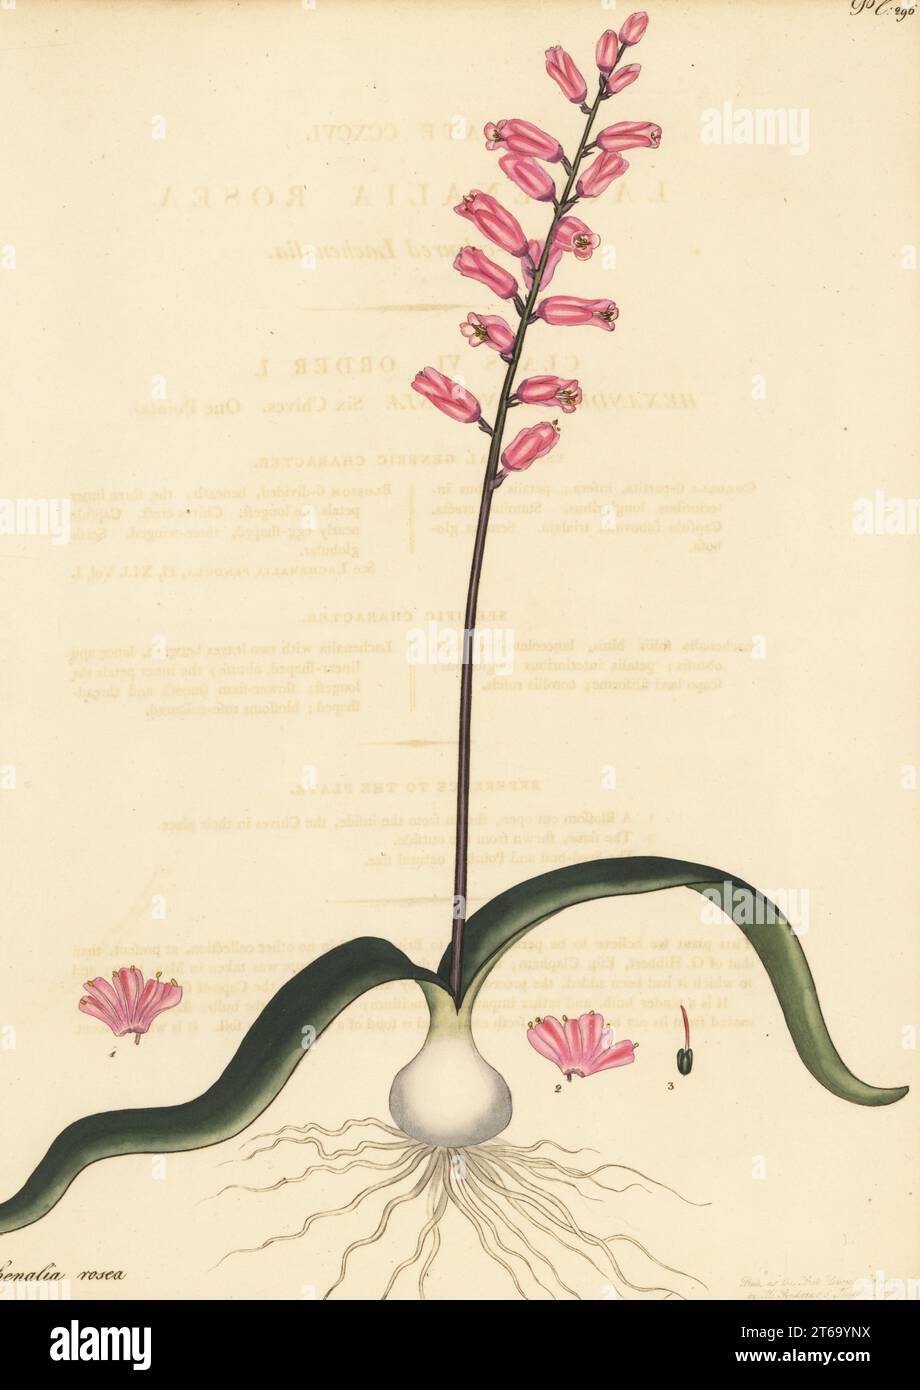 Cape cowslip, Lachenalia rosea. Rose-coloured lachenalia. From the Cape of Good Hope, South Africa, in the George Hibbert collection. Copperplate engraving drawn, engraved and hand-coloured by Henry Andrews from his Botanical Register, Volume 5, self-published in Knightsbridge, London, 1803. Stock Photo